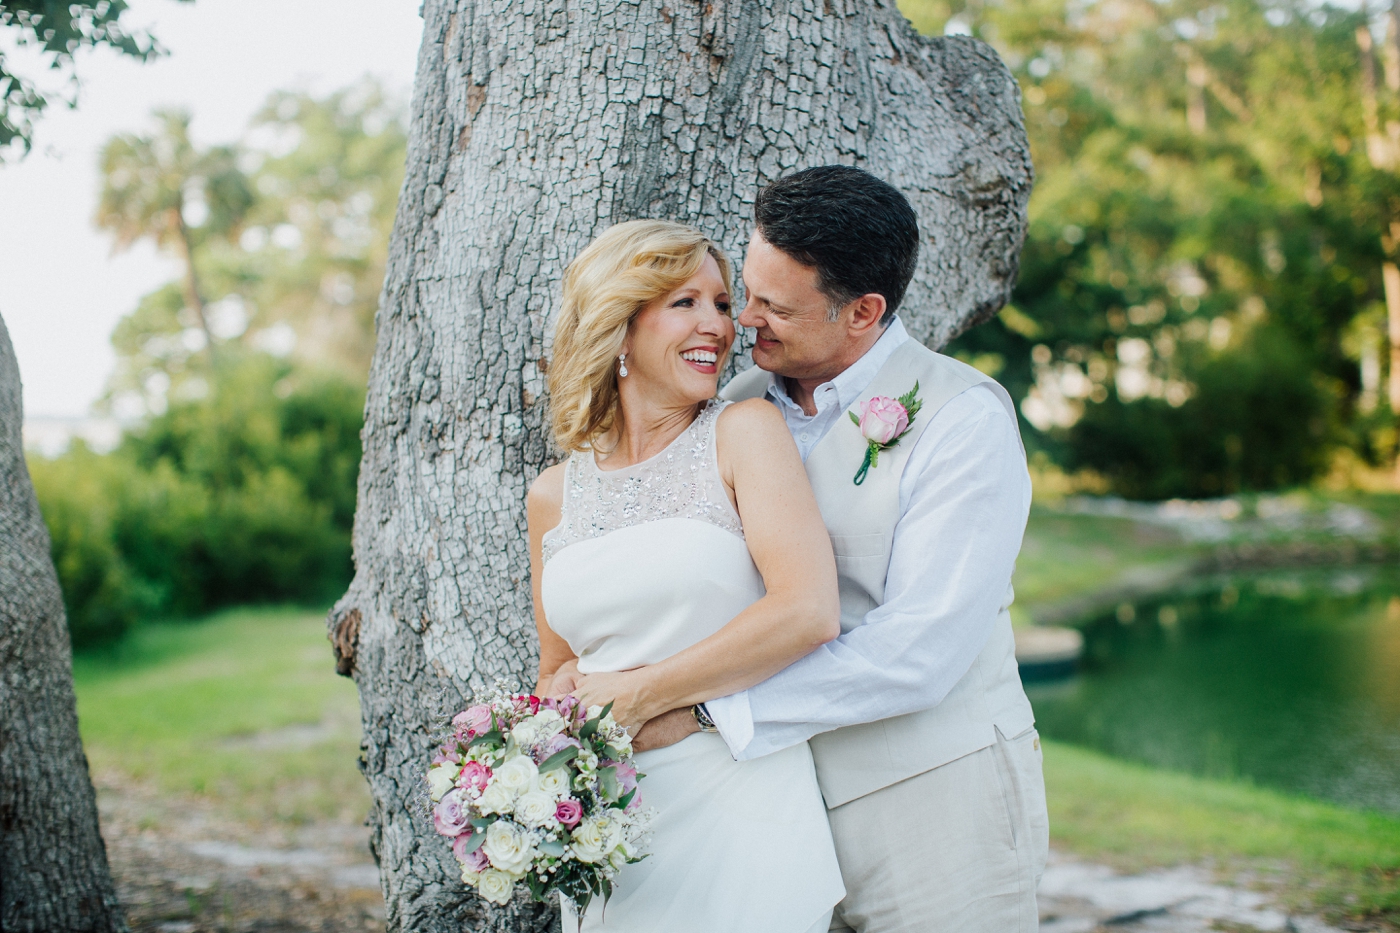 Michelle & David’s Sweet Elopement at The Landings | Izzy and Co.